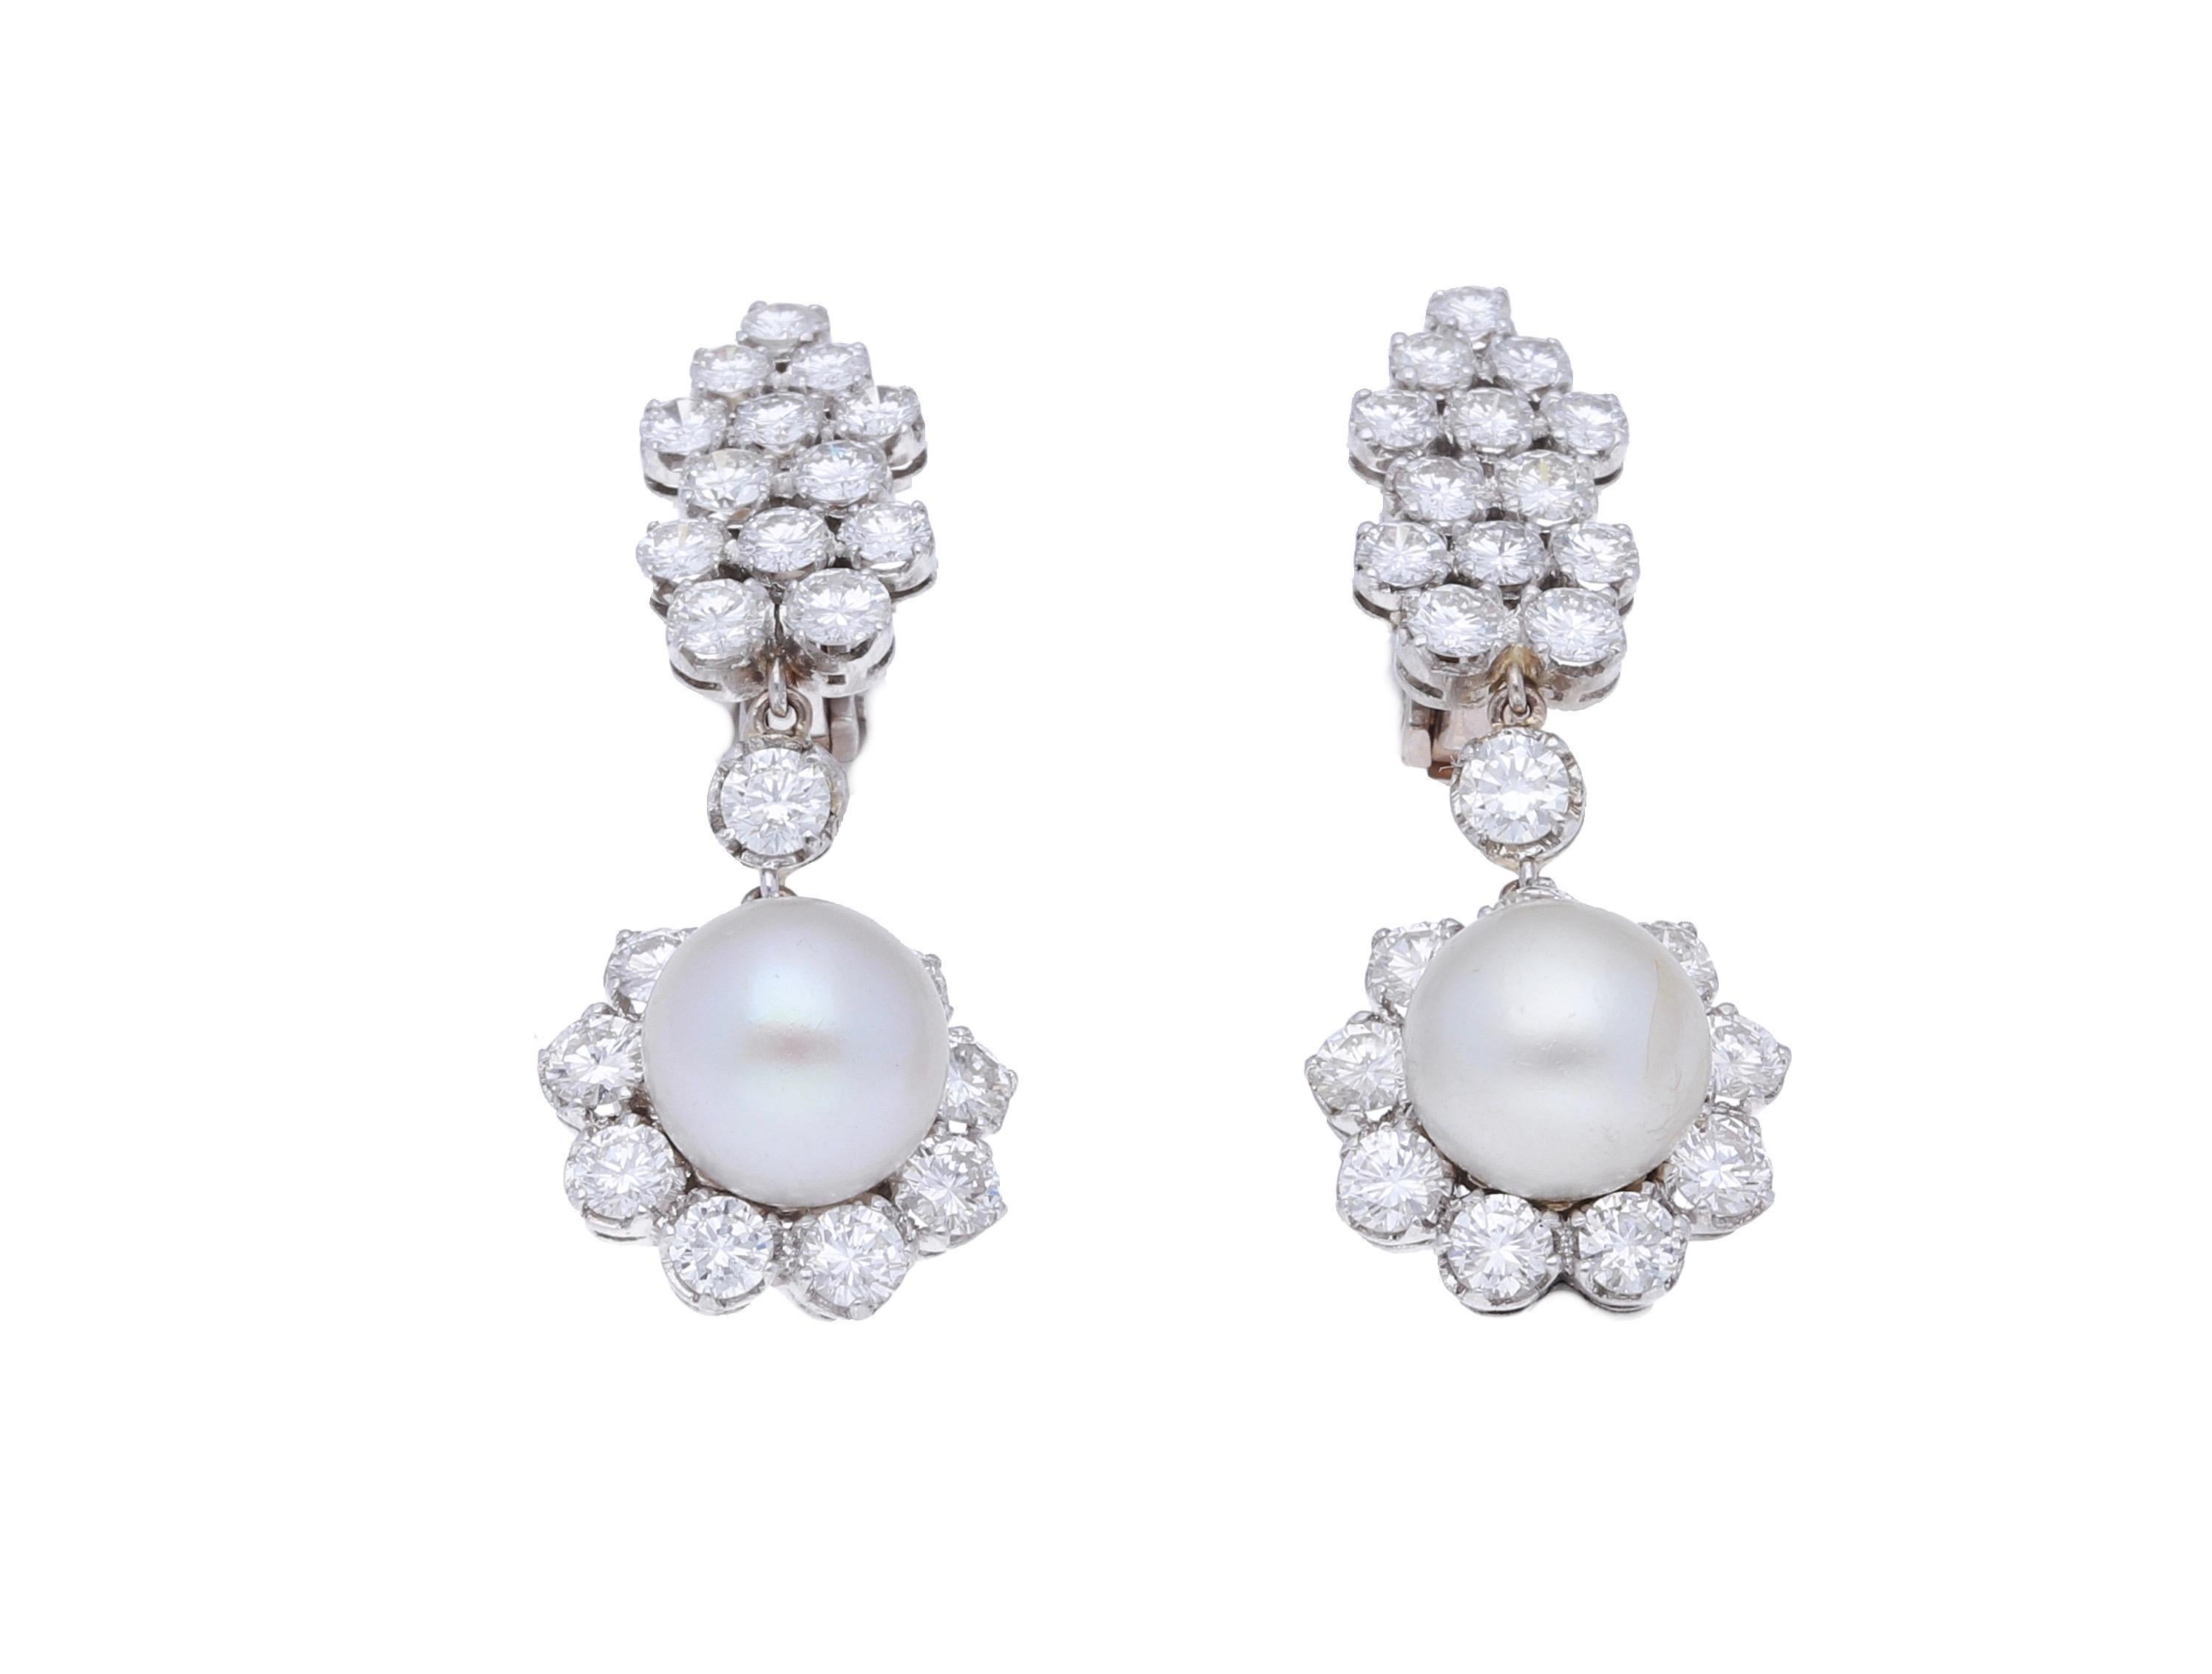 18 kt. white gold earrings with 7.00 carat of round-cut diamonds and 2 natural saltwater pearls.
The pearls are approximately 9.77 x 7.35 mm., are partially drilled and have spherical shape.
Those earrings are hand-made in Italy from 1980 ca.
